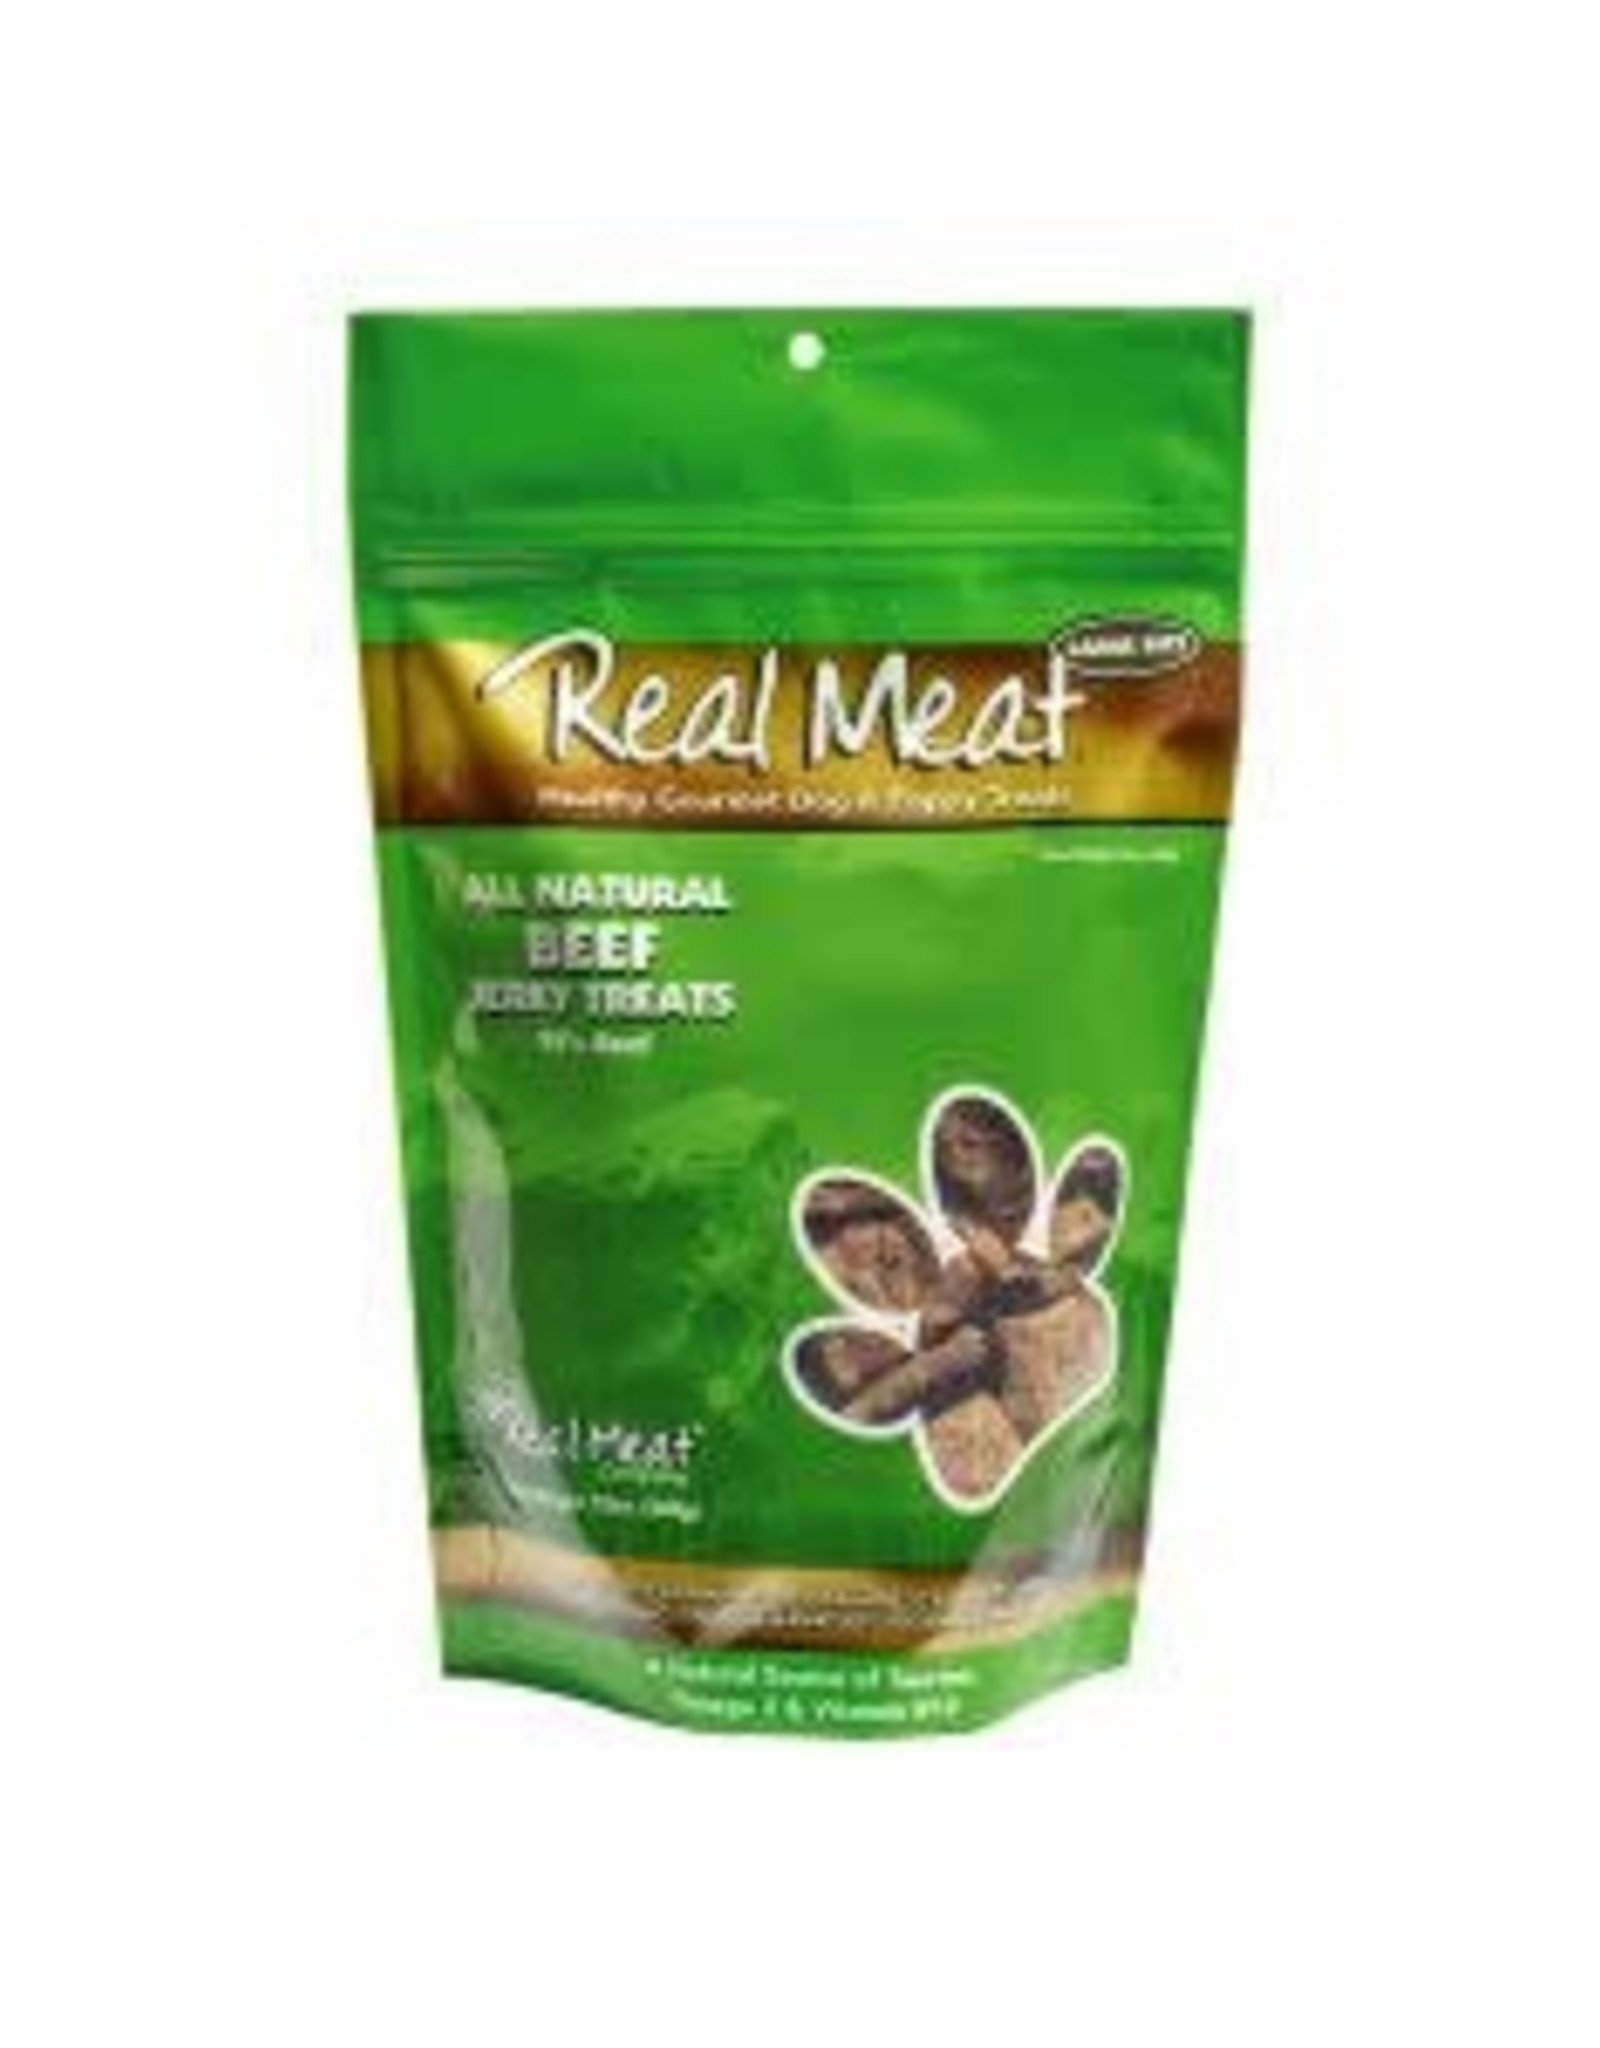 The Real Meat Company Real Meat Jerky Treats: Beef